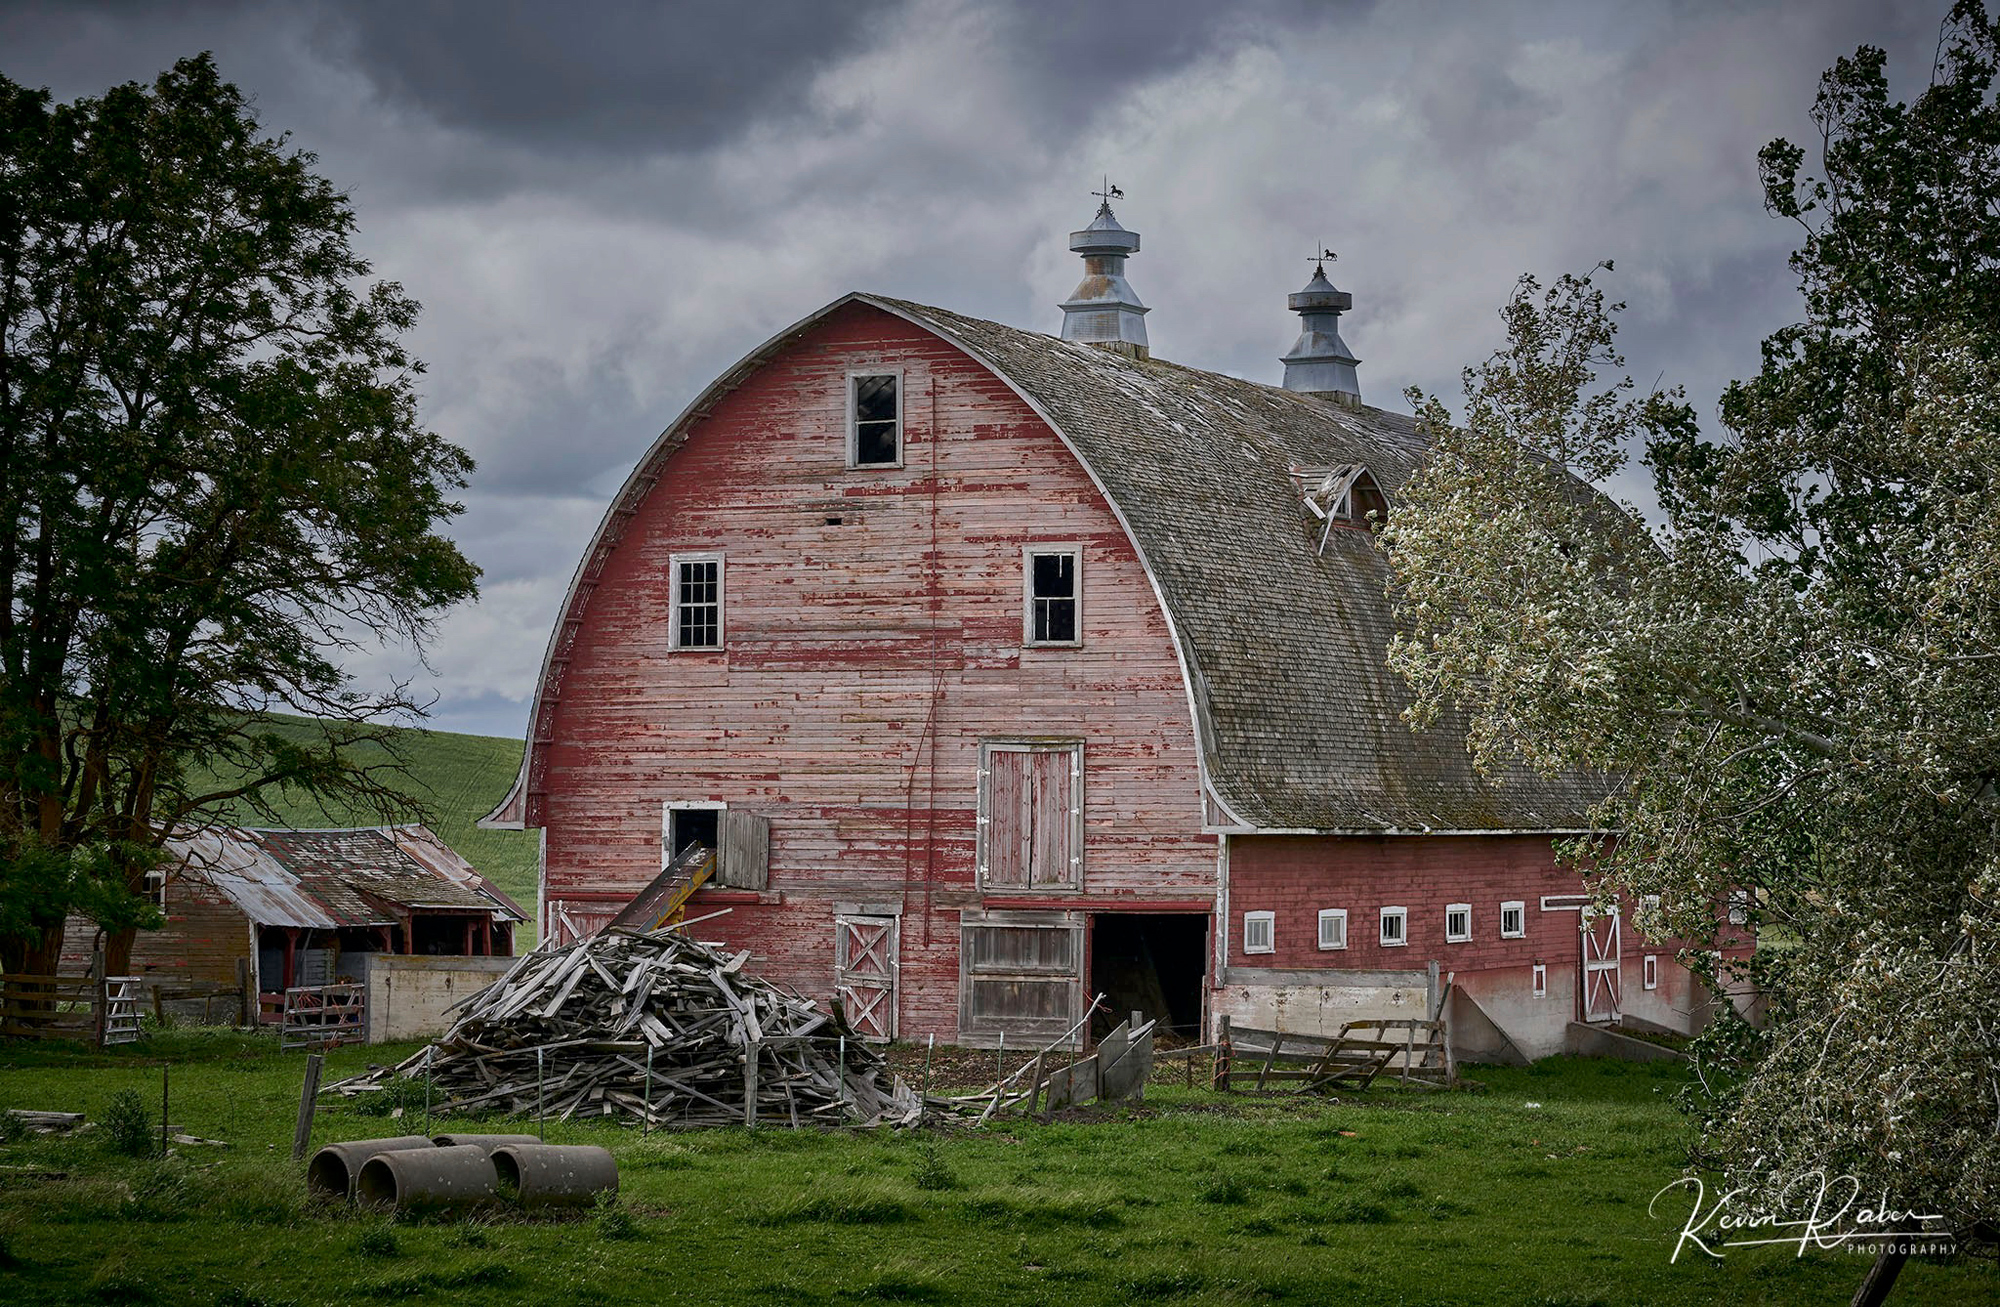 One of the biggest and prettiest barns and each year it falls further in dispair